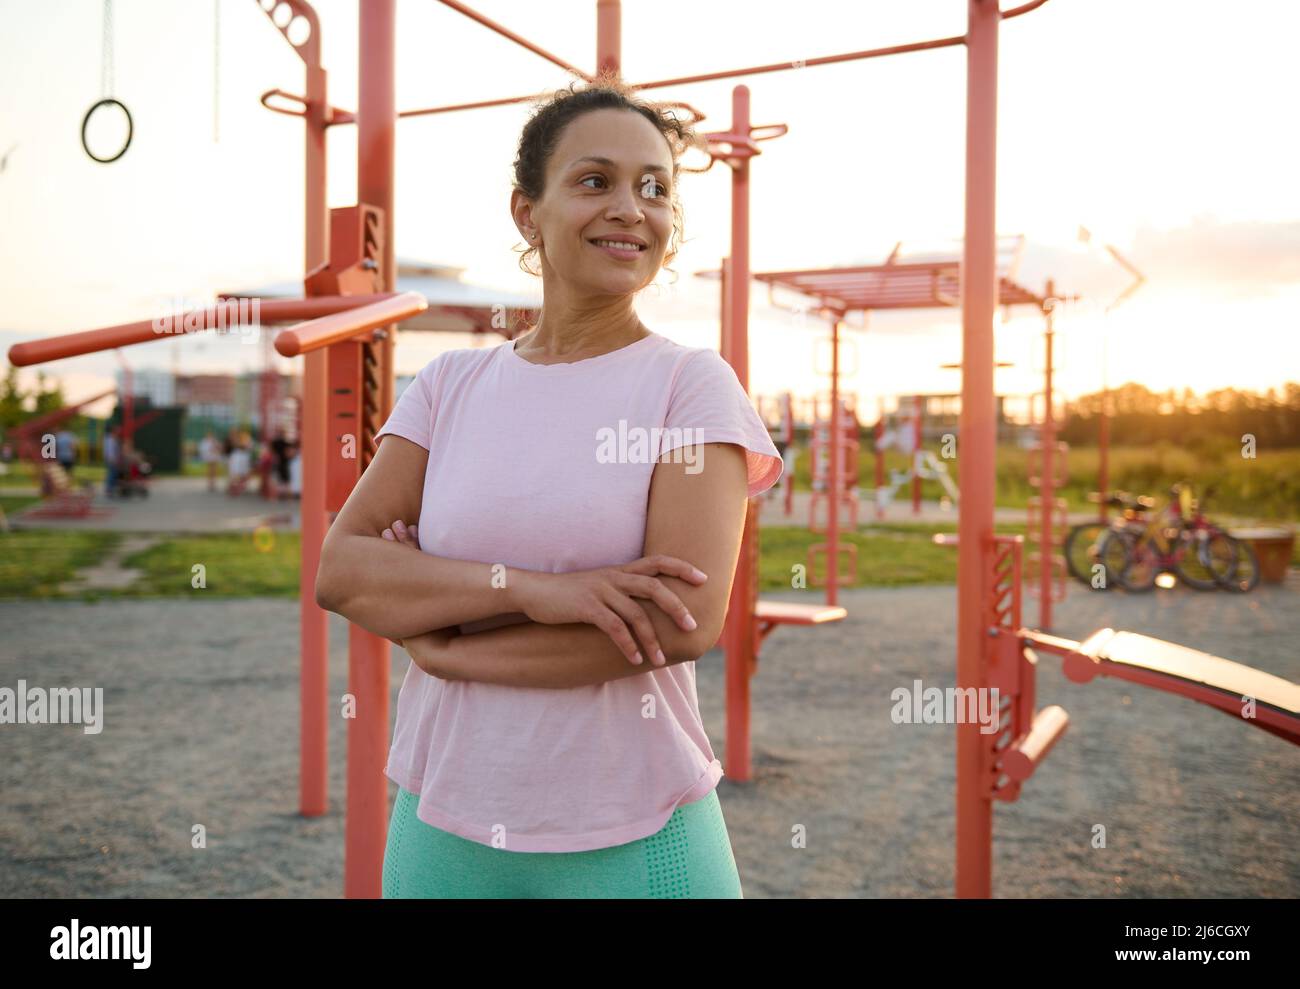 Confident portrait of a pleasant middle aged multiethnic woman, athlete, sportswoman in activewear posing with crossed arms against crossbar in the sp Stock Photo